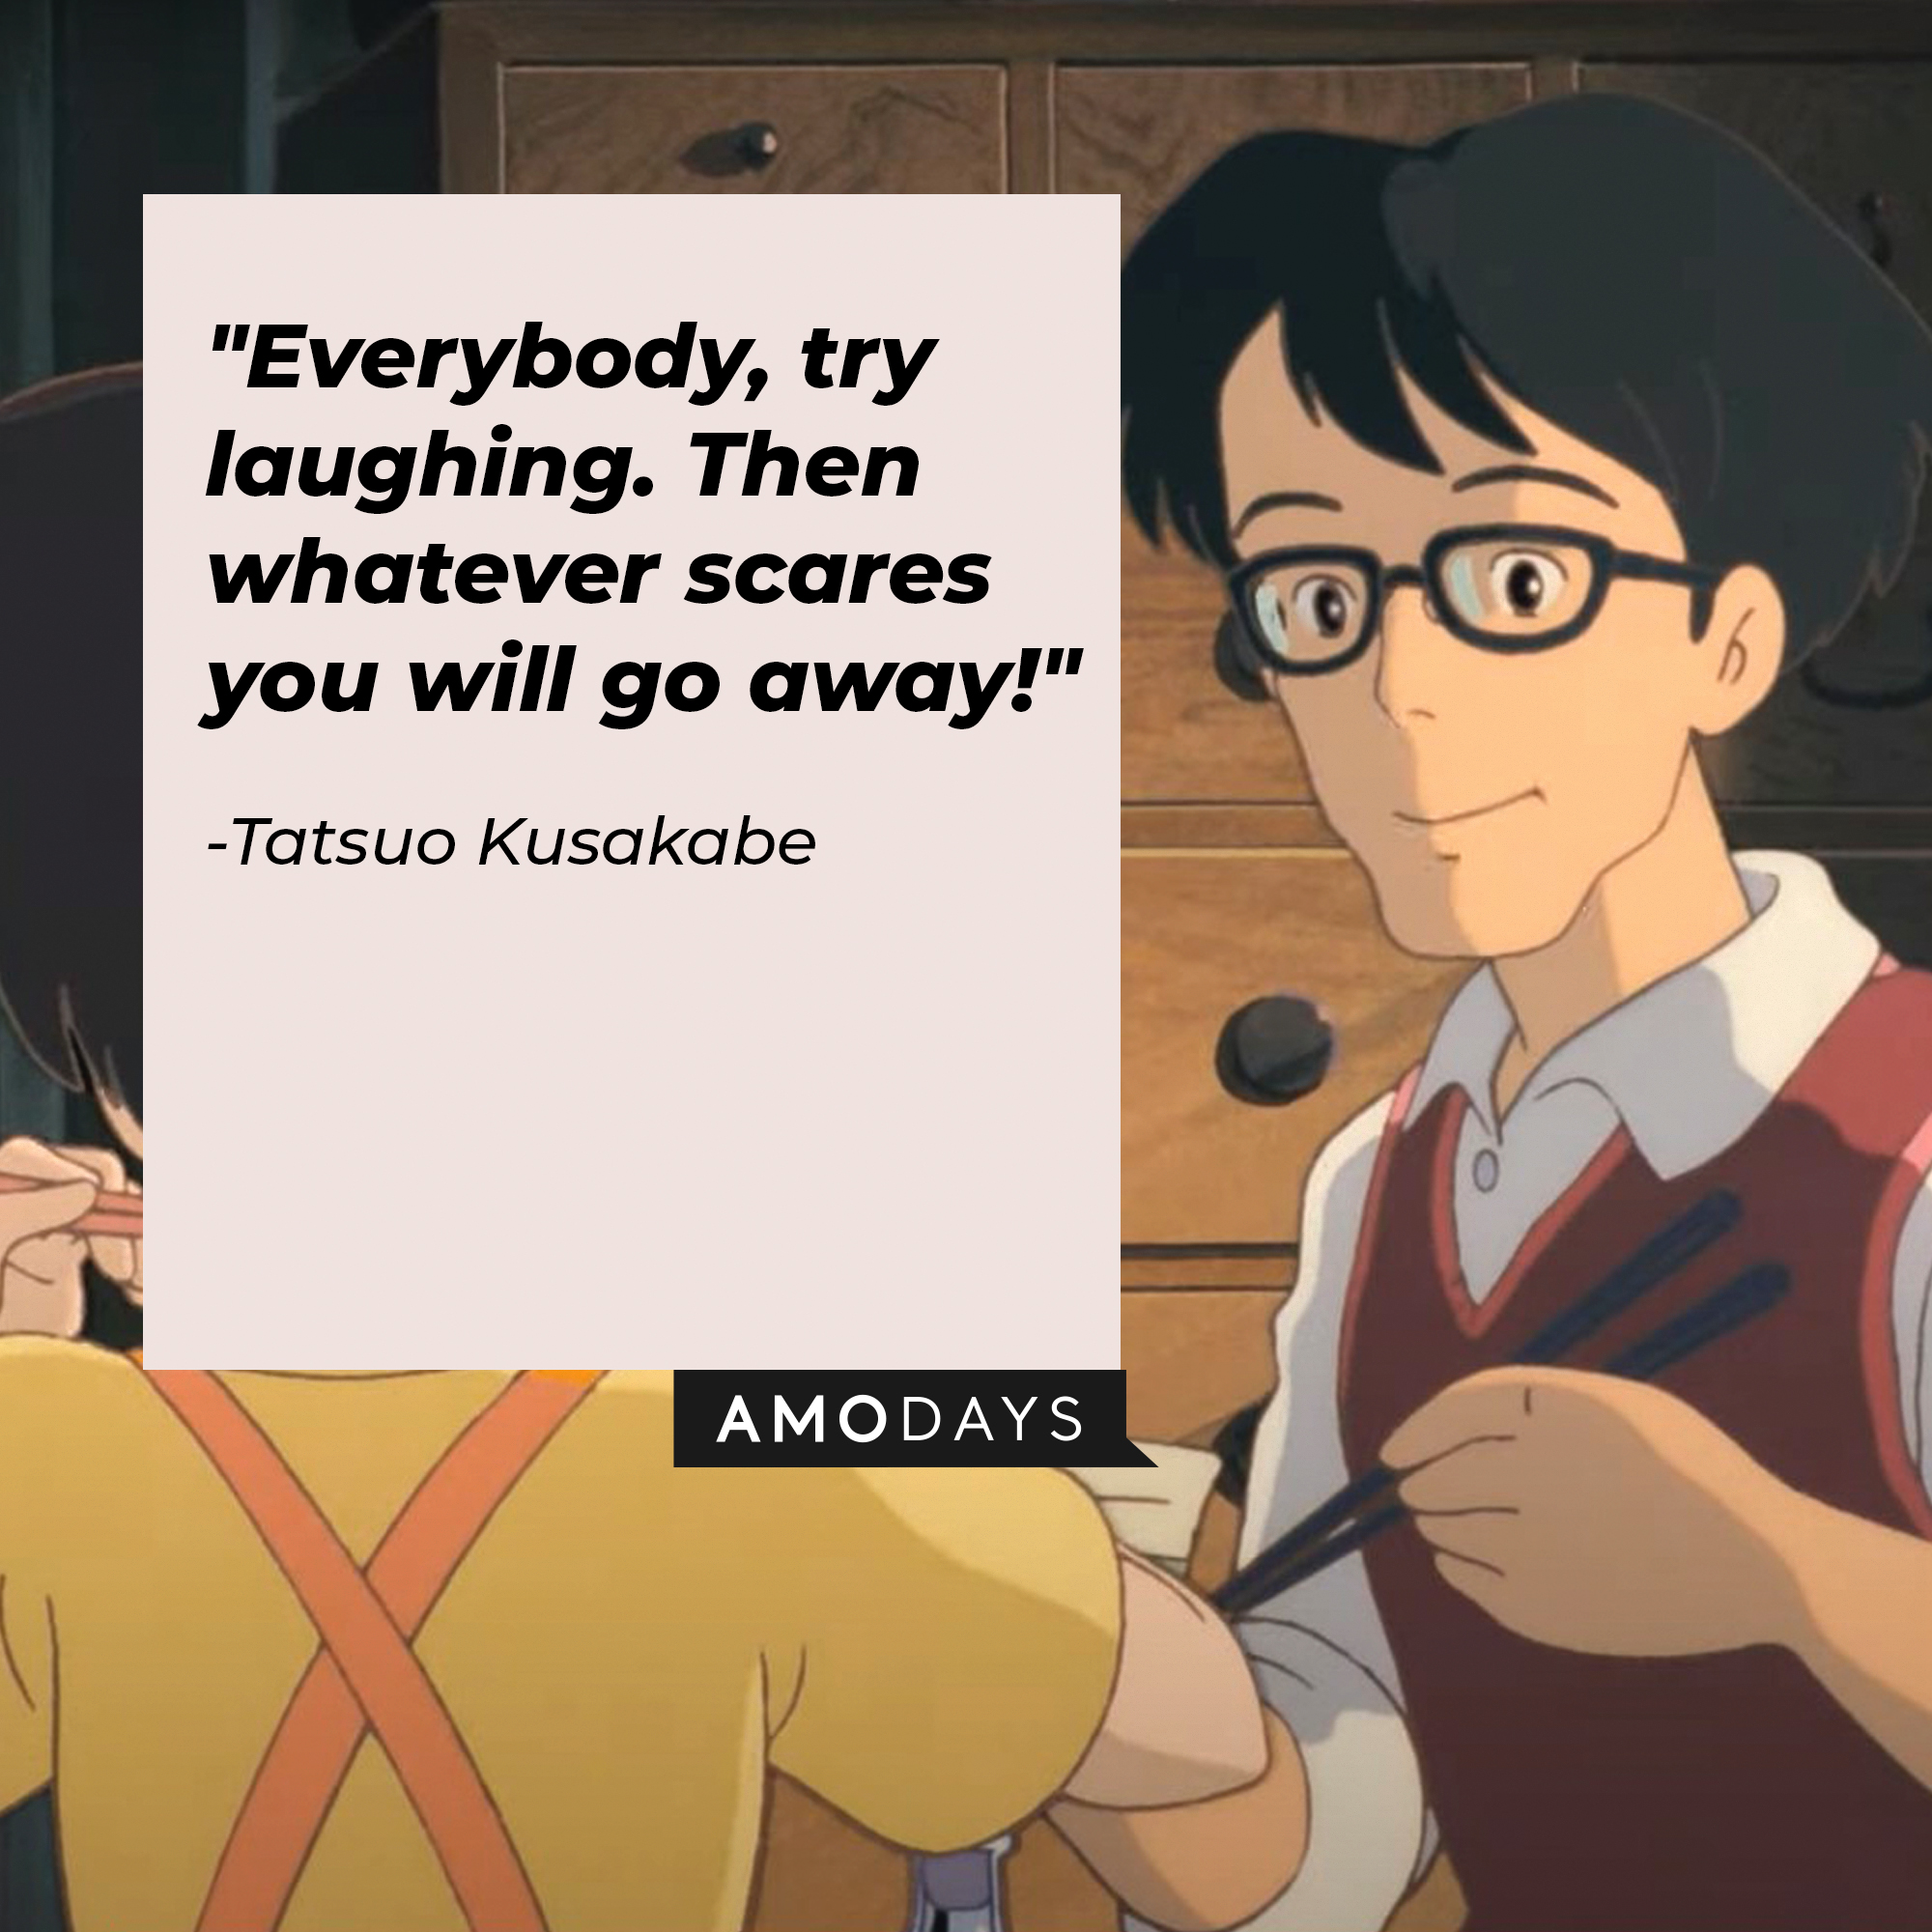 Tatsuo Kusakabe's quote: "Everybody, try laughing. Then whatever scares you will go away!" | Source: Facebook.com/GhibliUSA